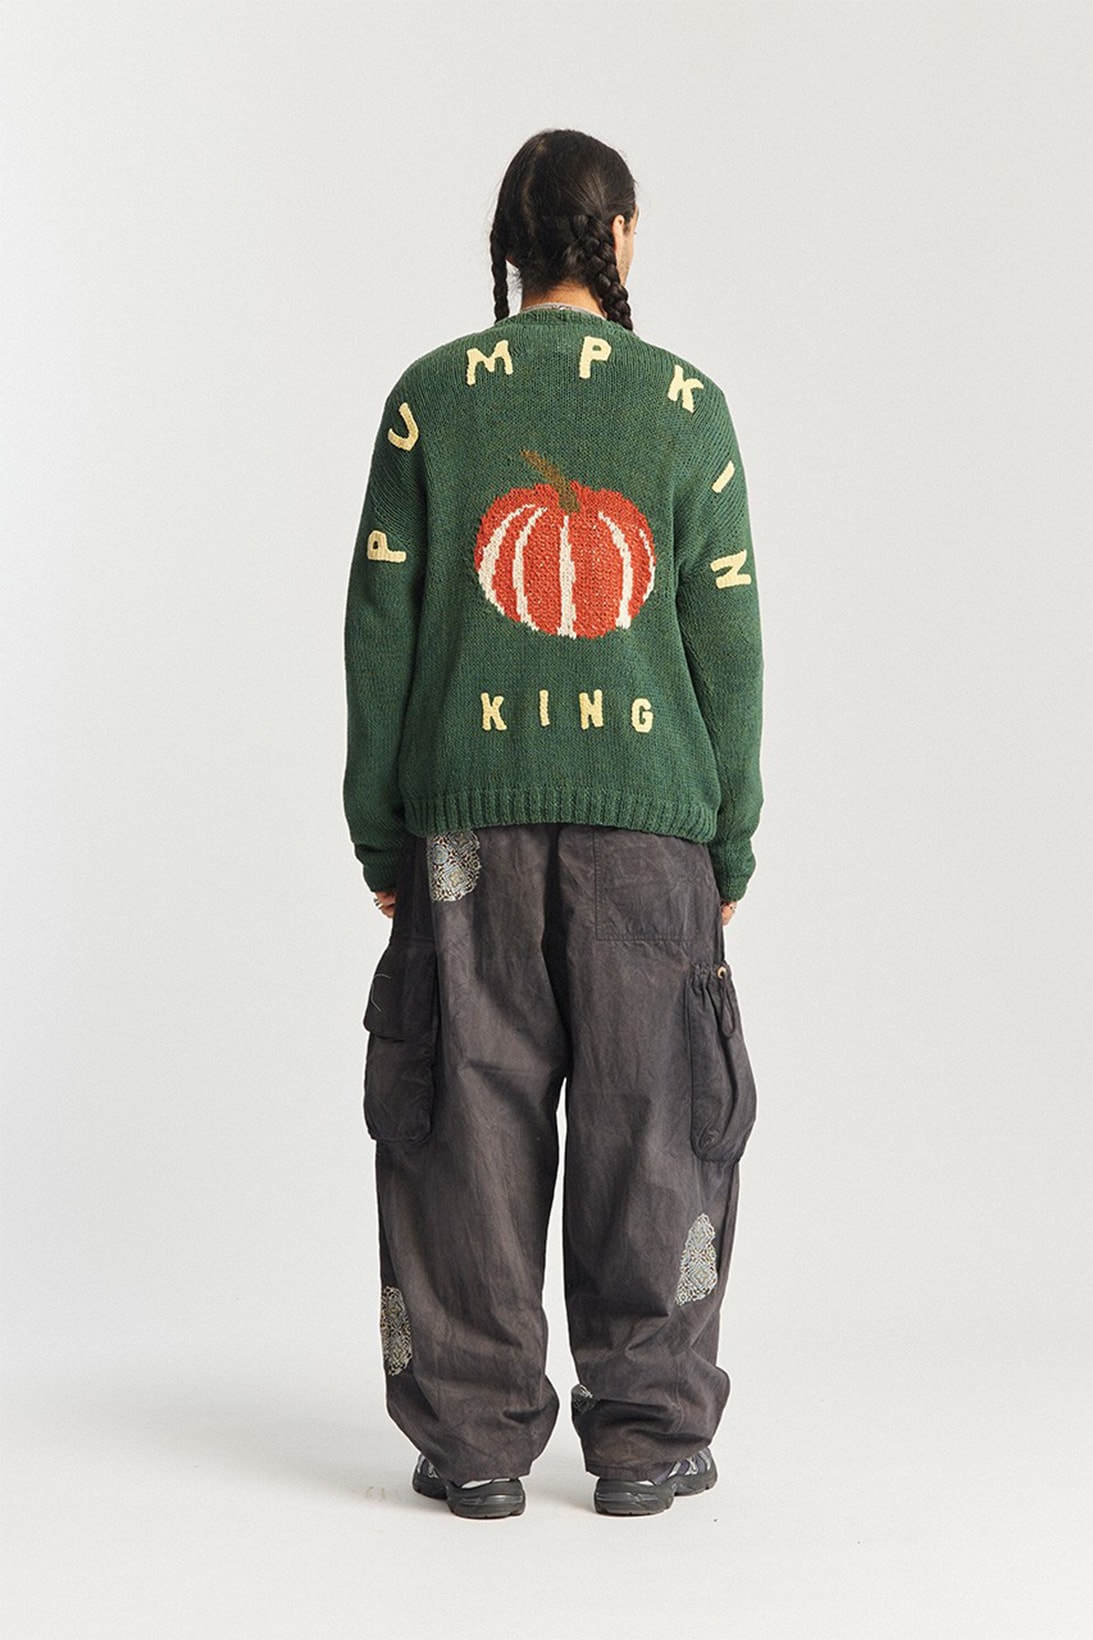 Story Mfg. Try Try Try Fall Winter Collection Lookbook "Pumpkin King" Cardigan Pants Green Gray